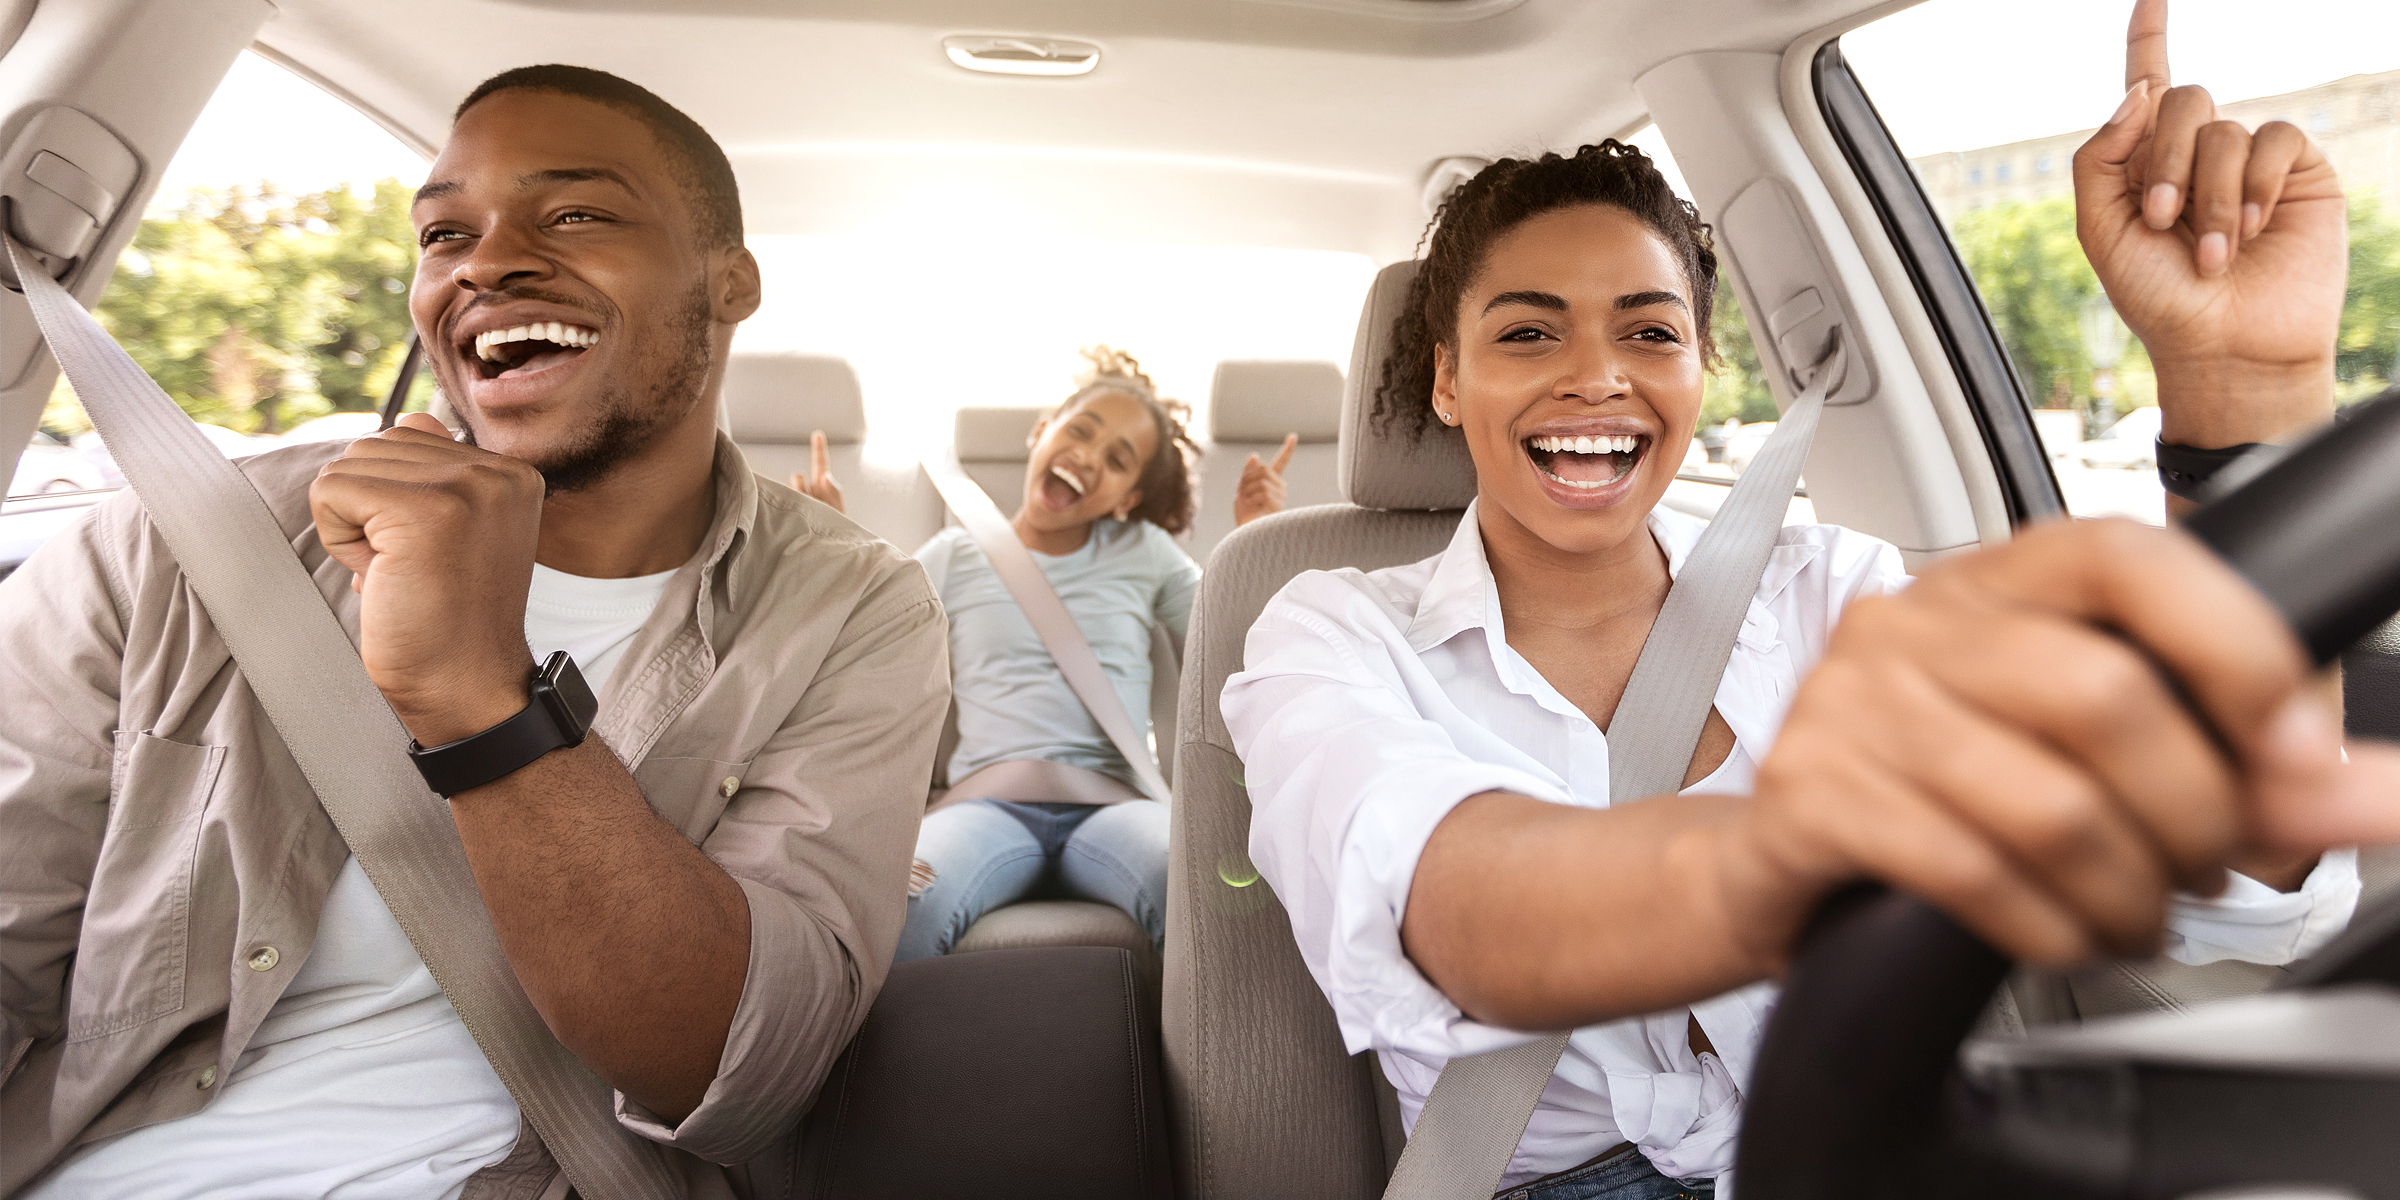 A family having fun on a road trip | Source: Shutterstock